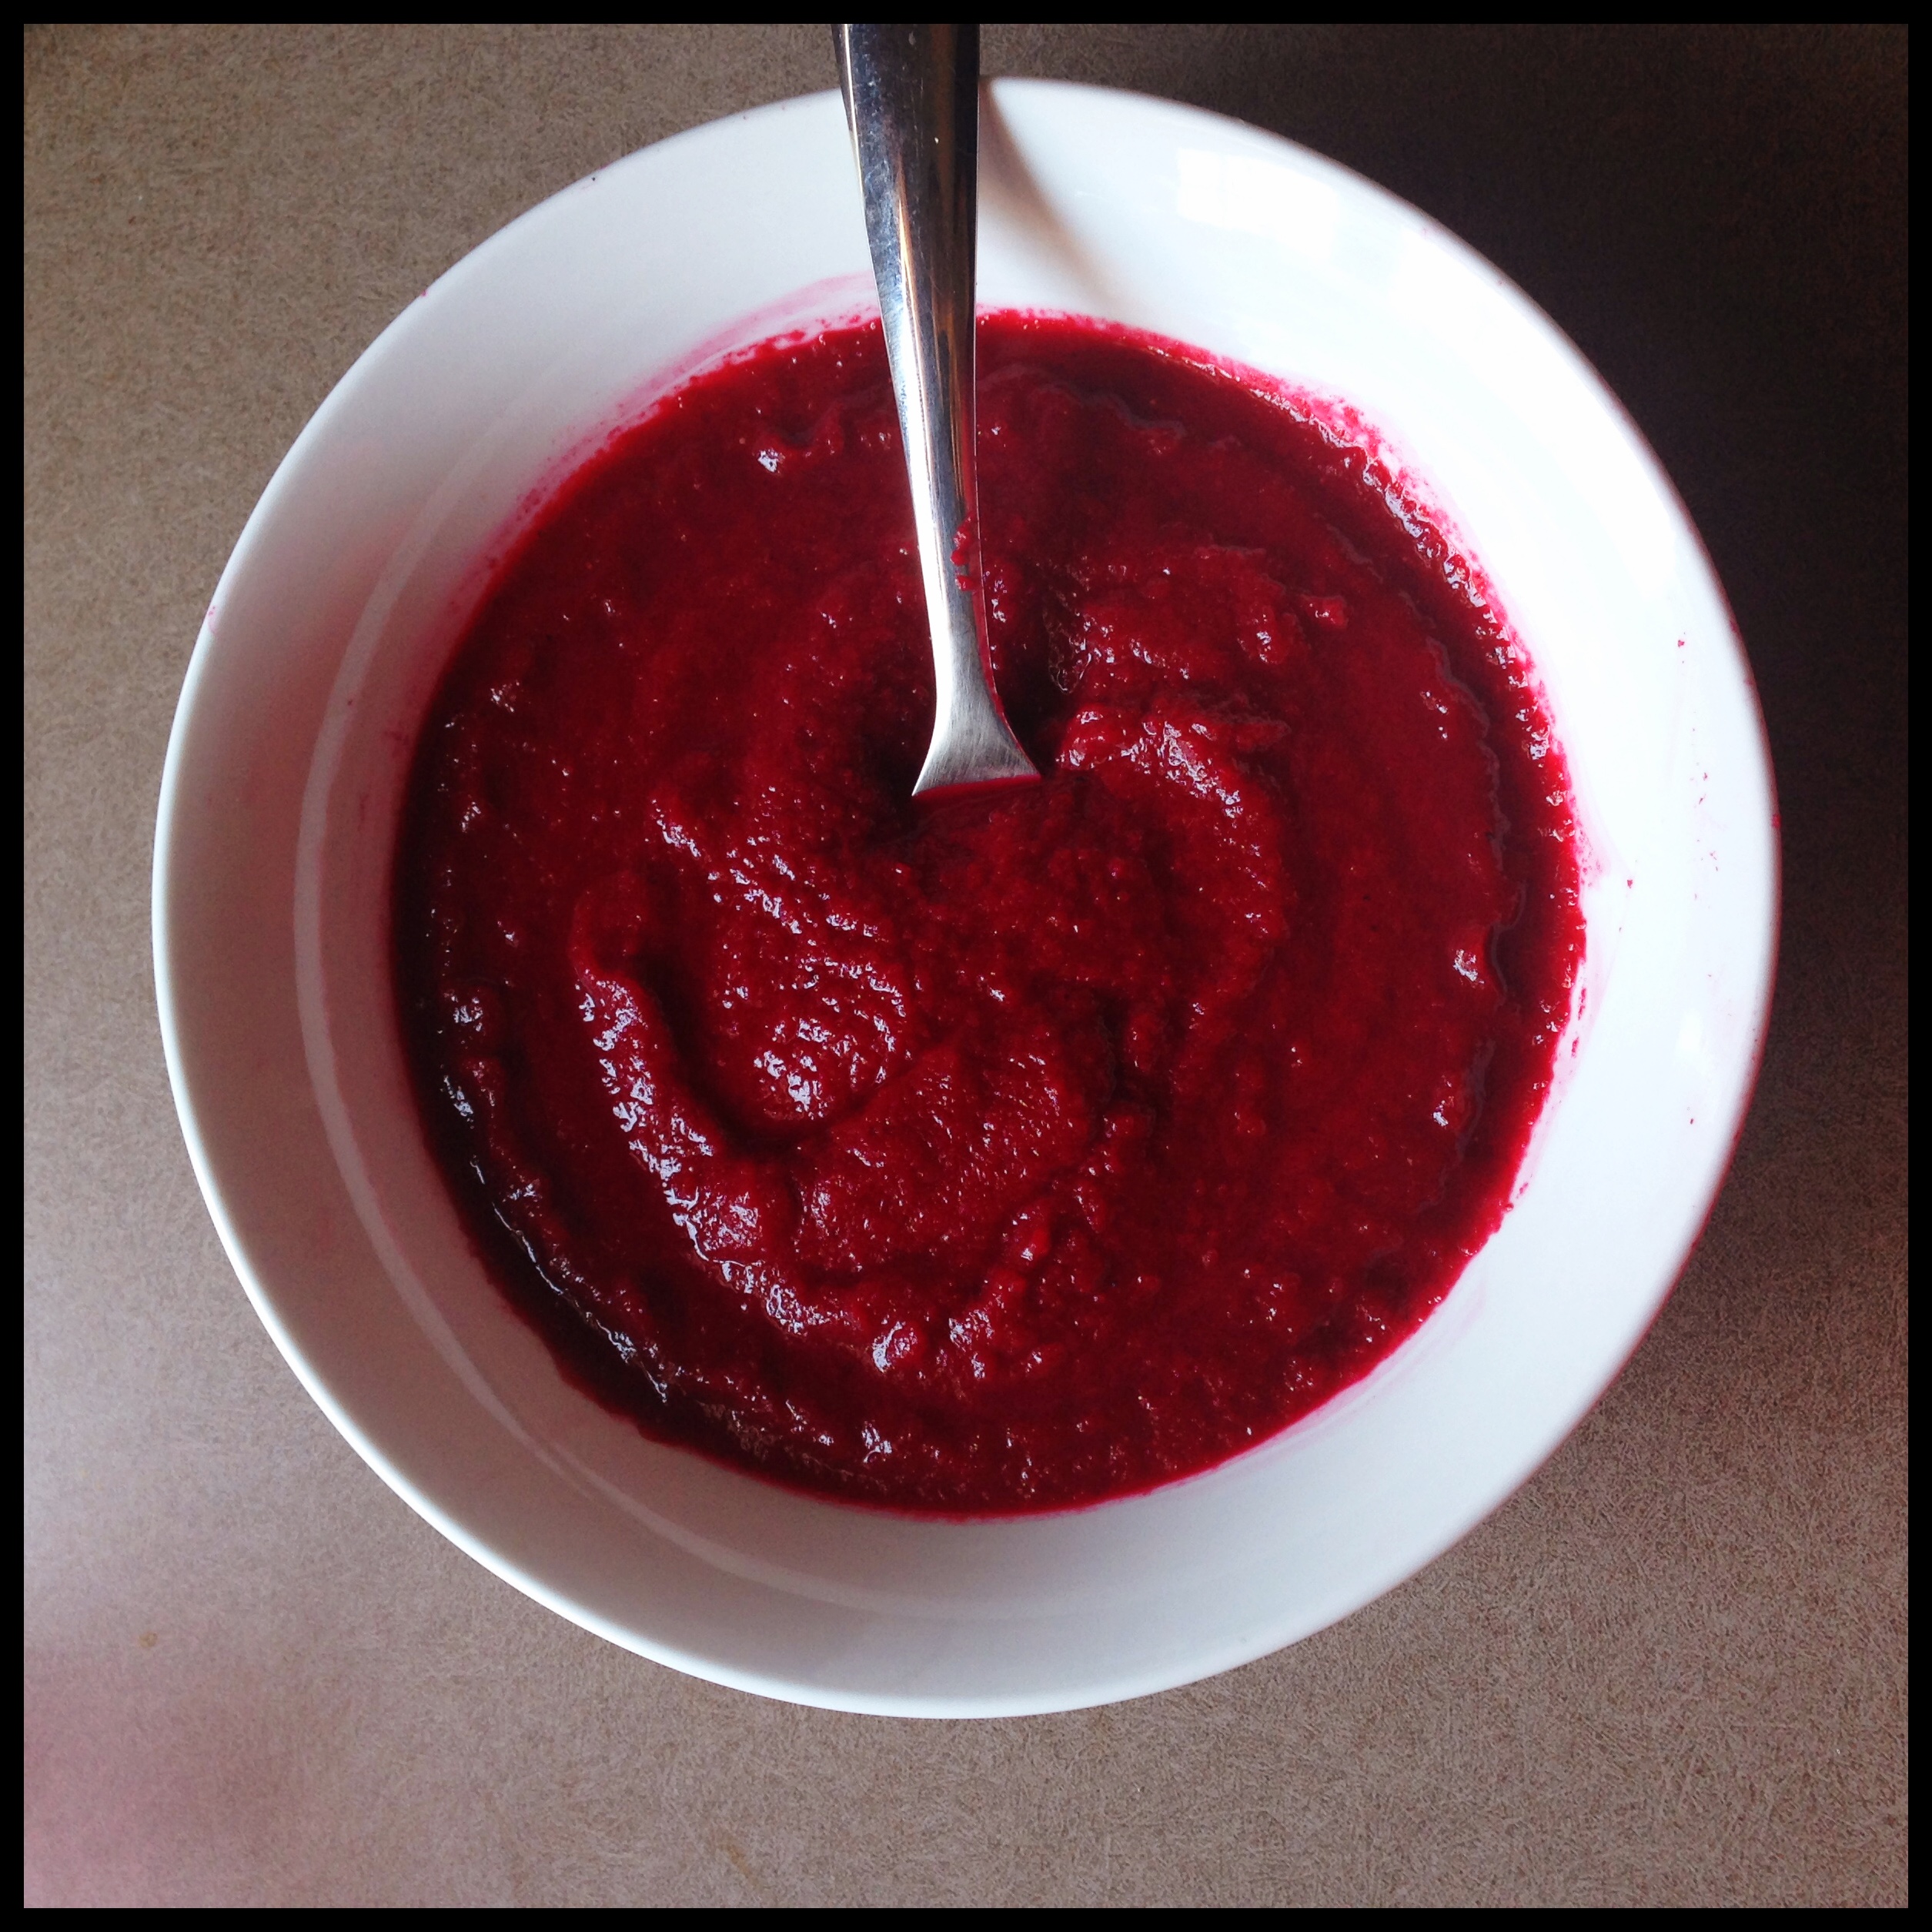 Gingered Five Spice Beetroot Soup